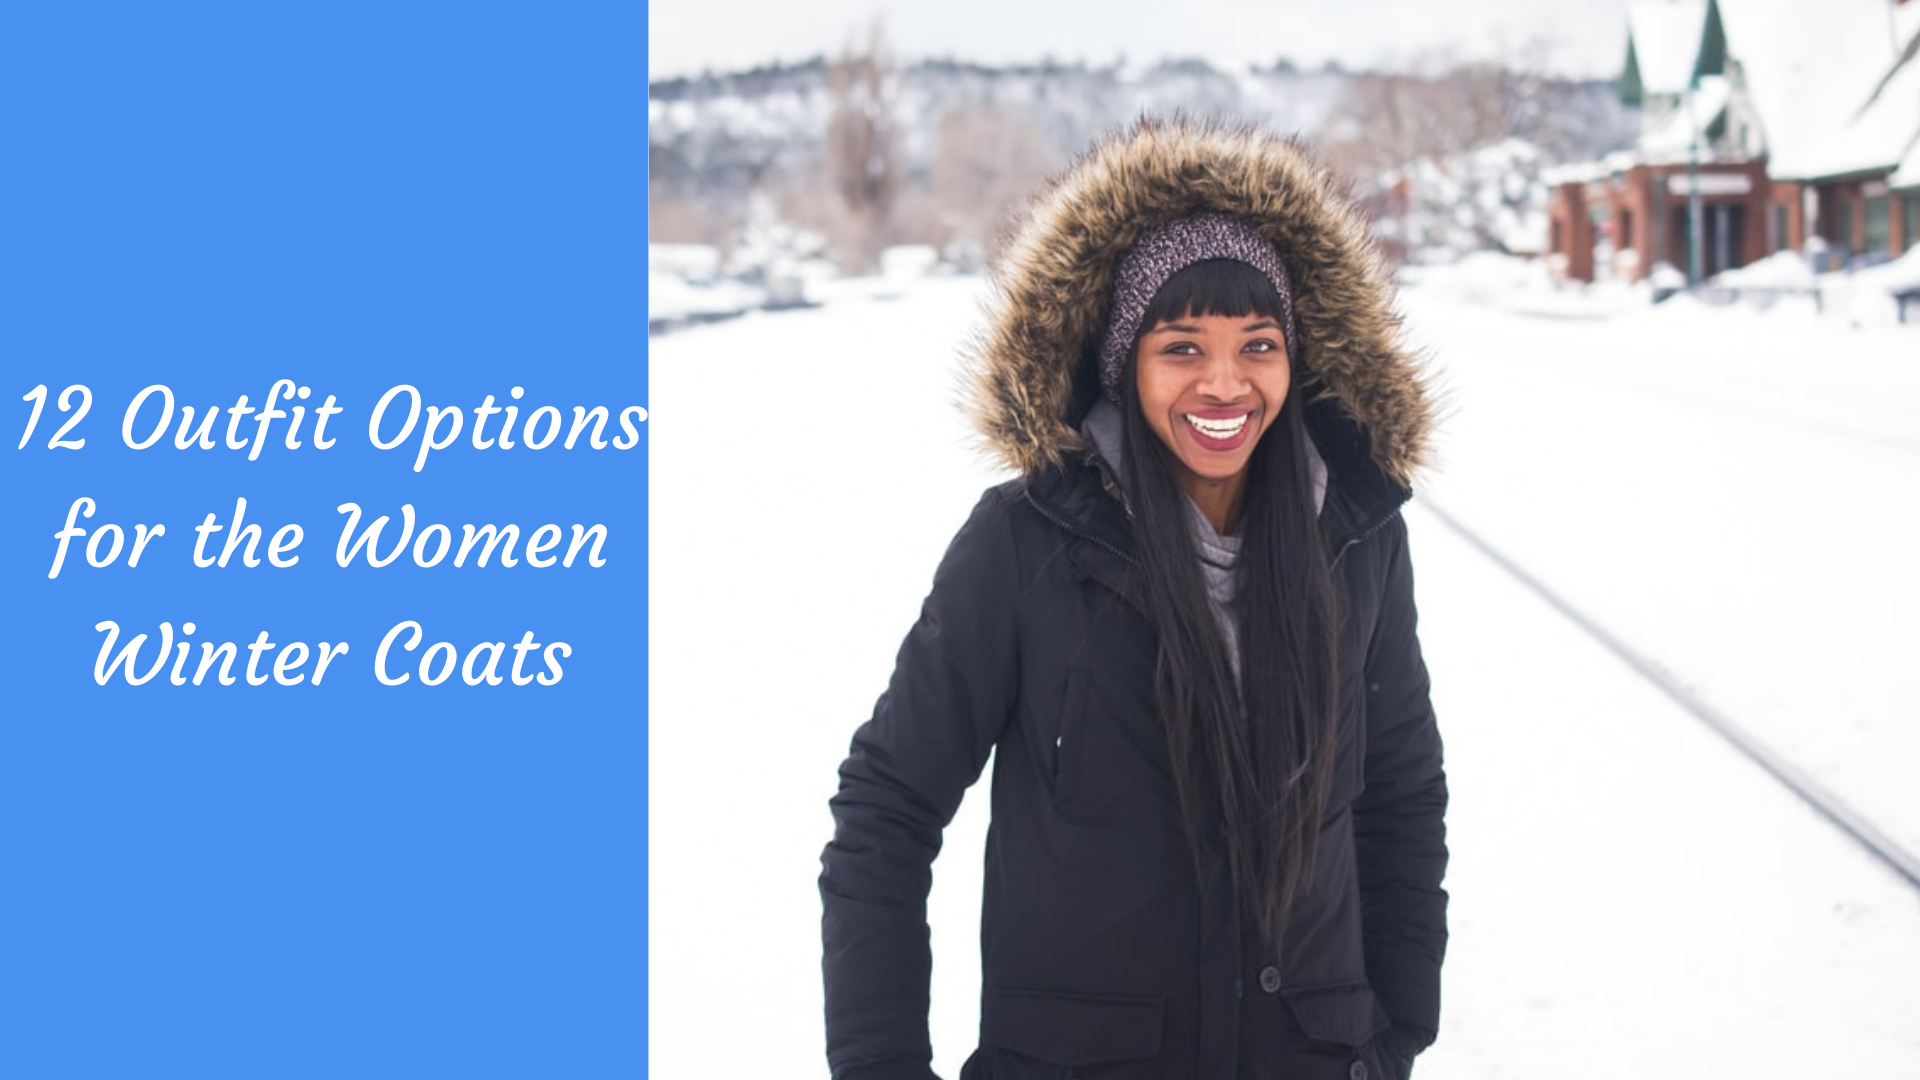 women winter coats article cover image